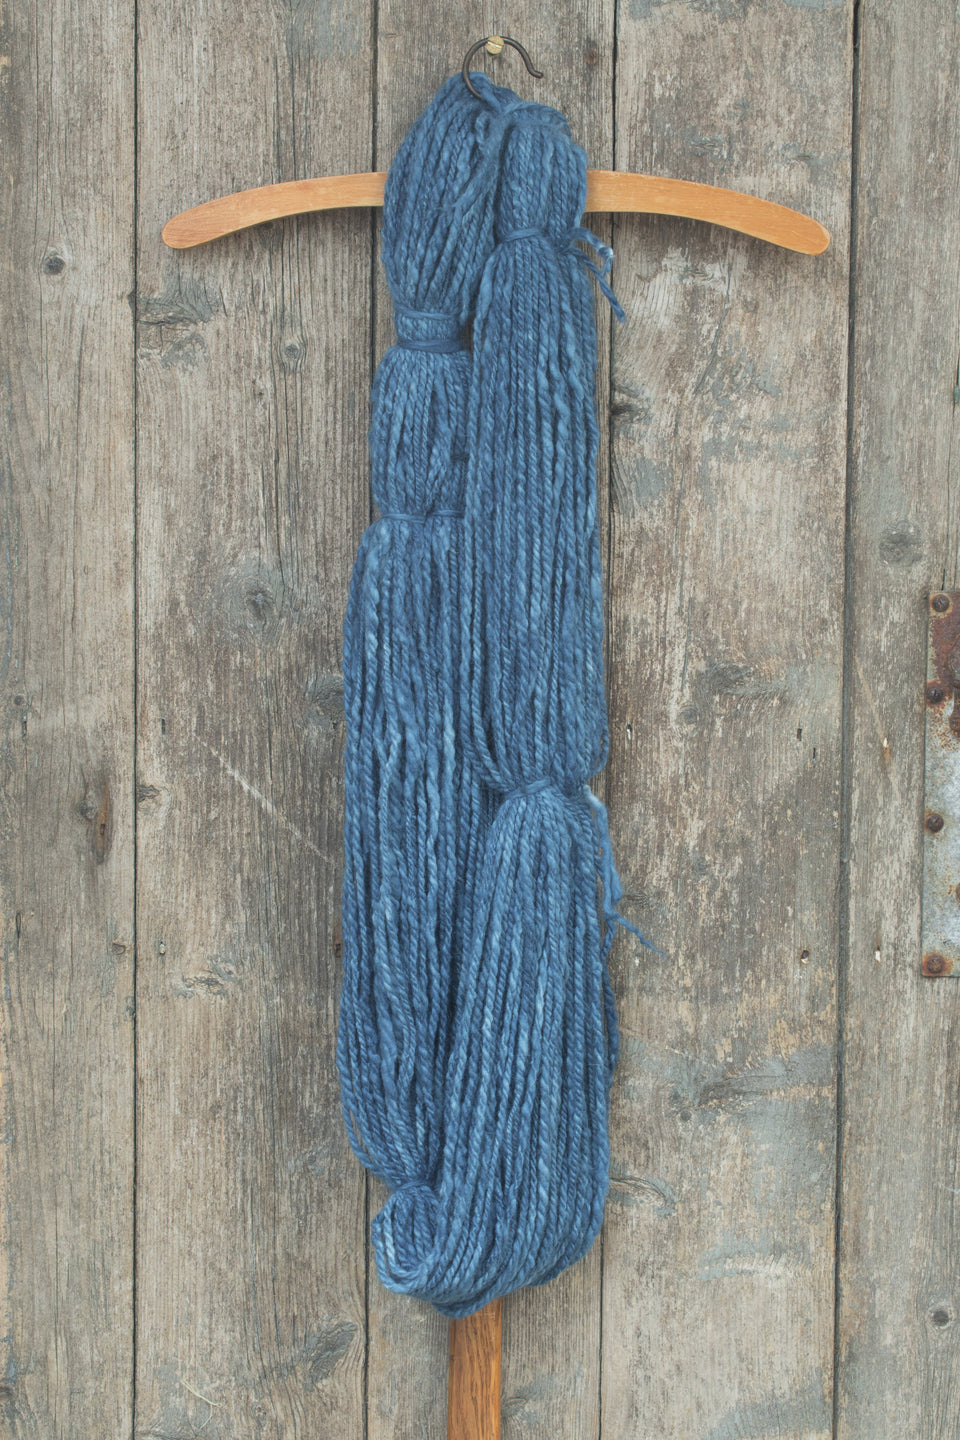 handspun yarn, hand-dyed in natural indigo. merino and cashmere. shown wound in a hank